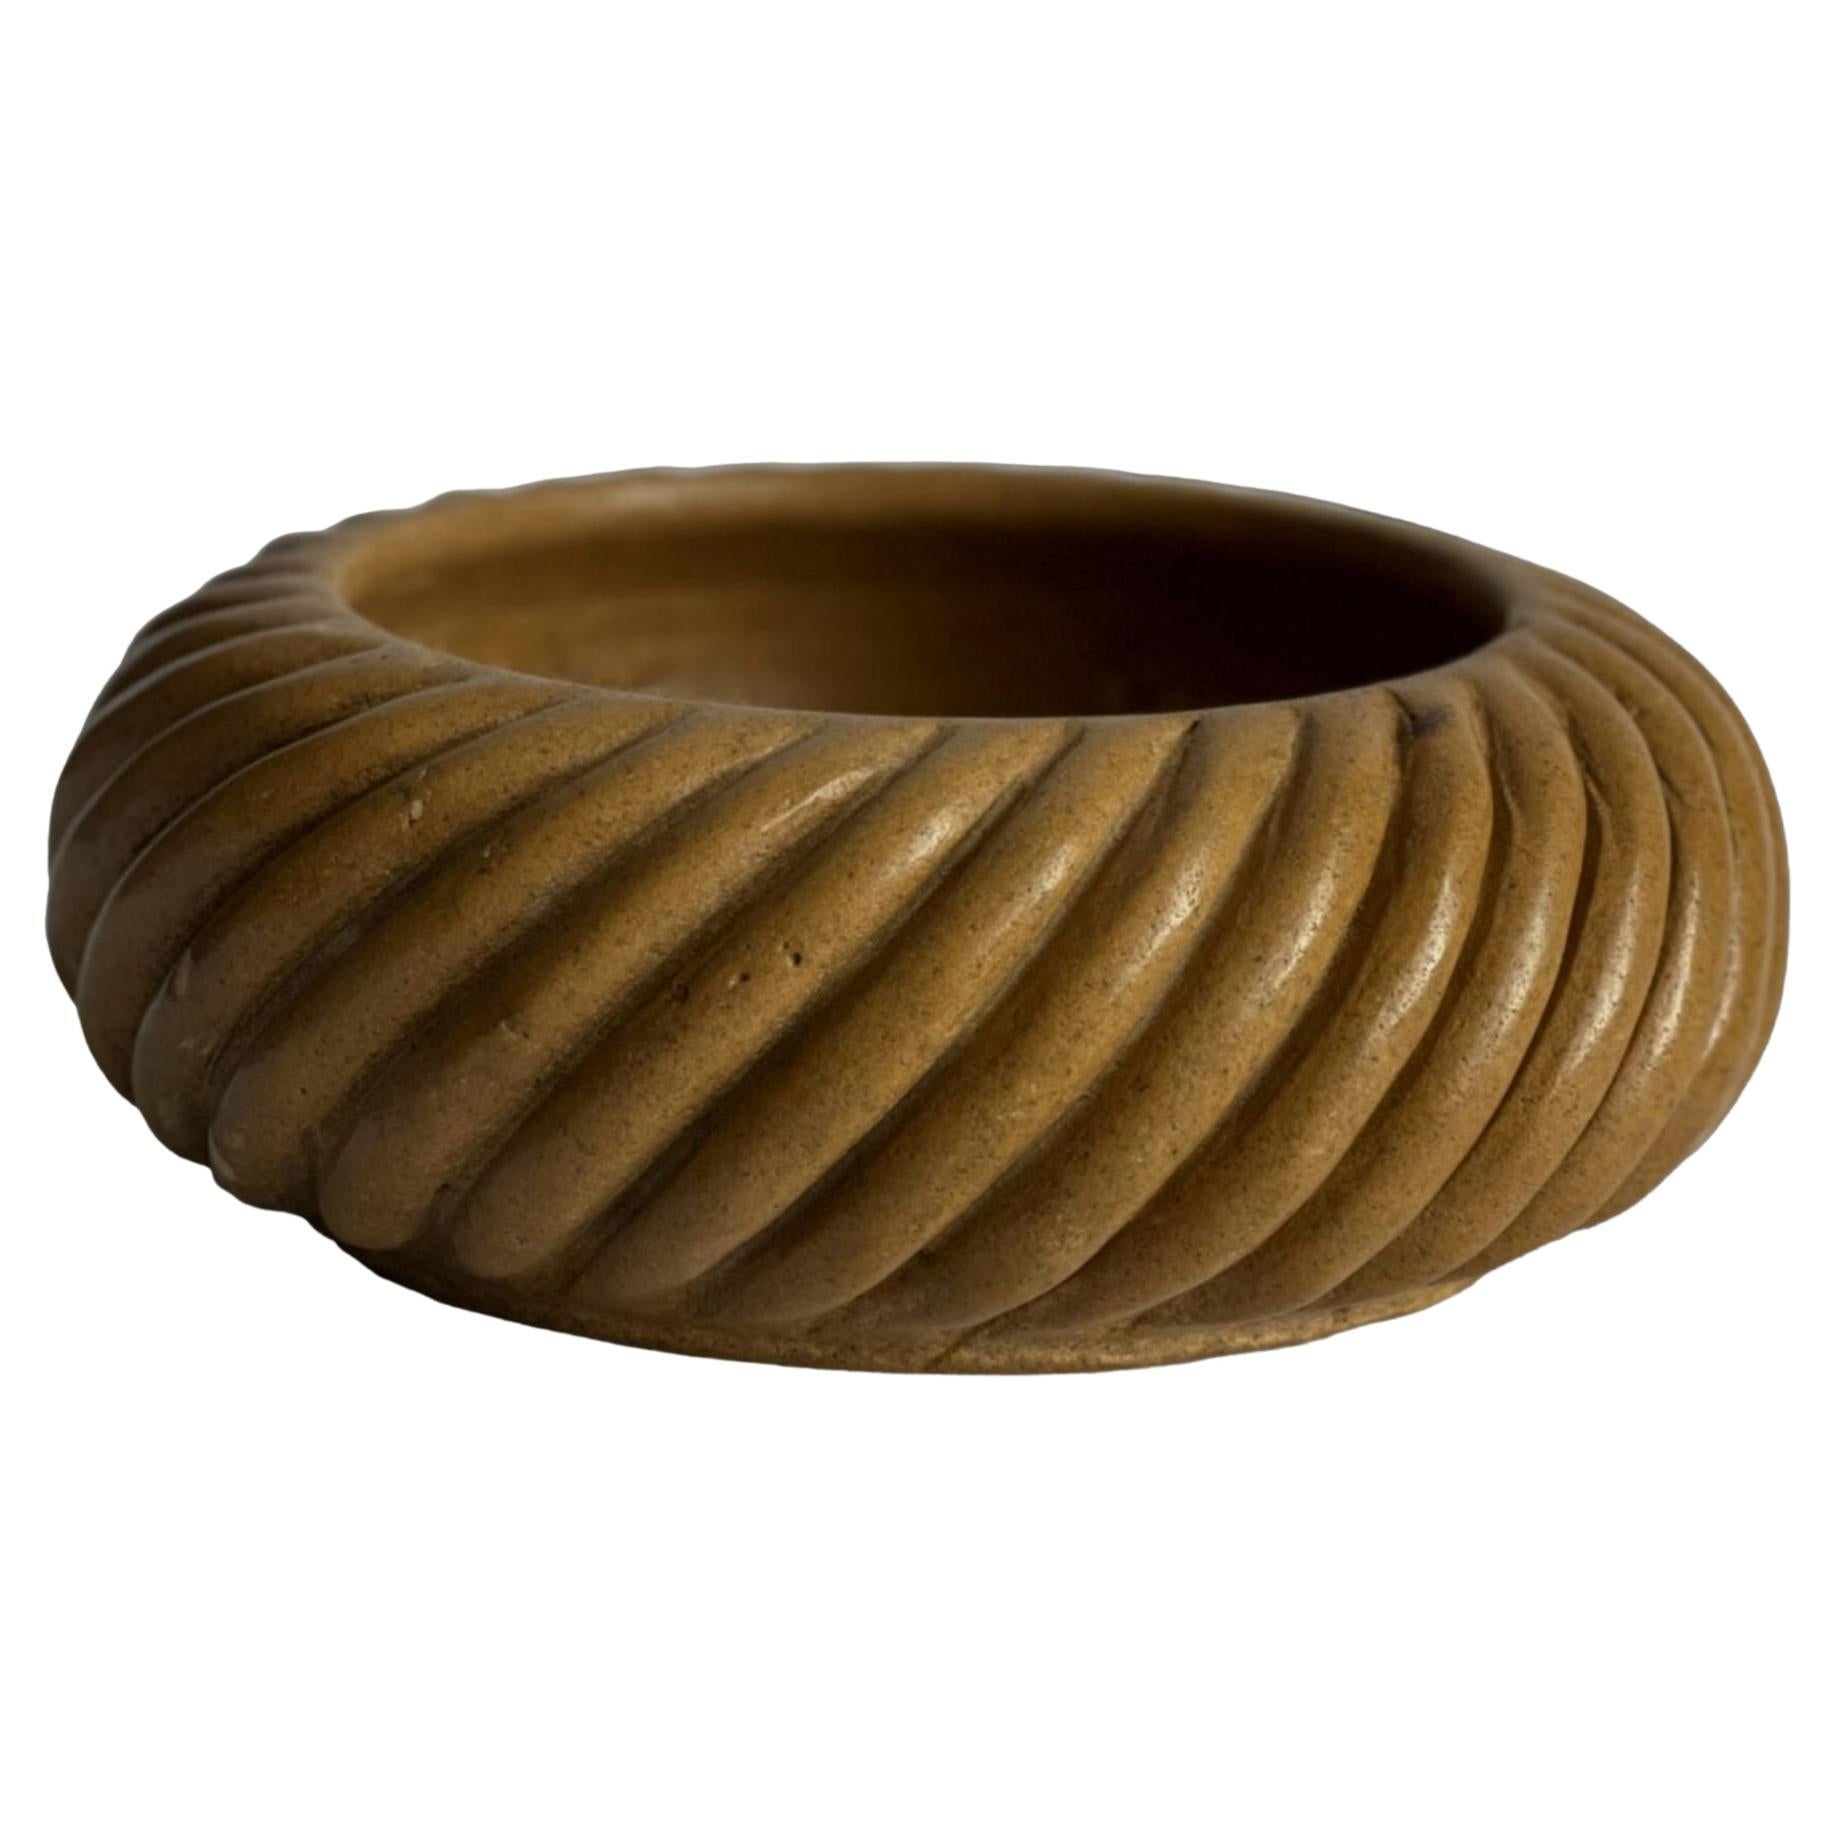 Cruller Bowl: Twisted Edge Stone Bowl in Marigold Jaisalmer by Anastasio Home For Sale